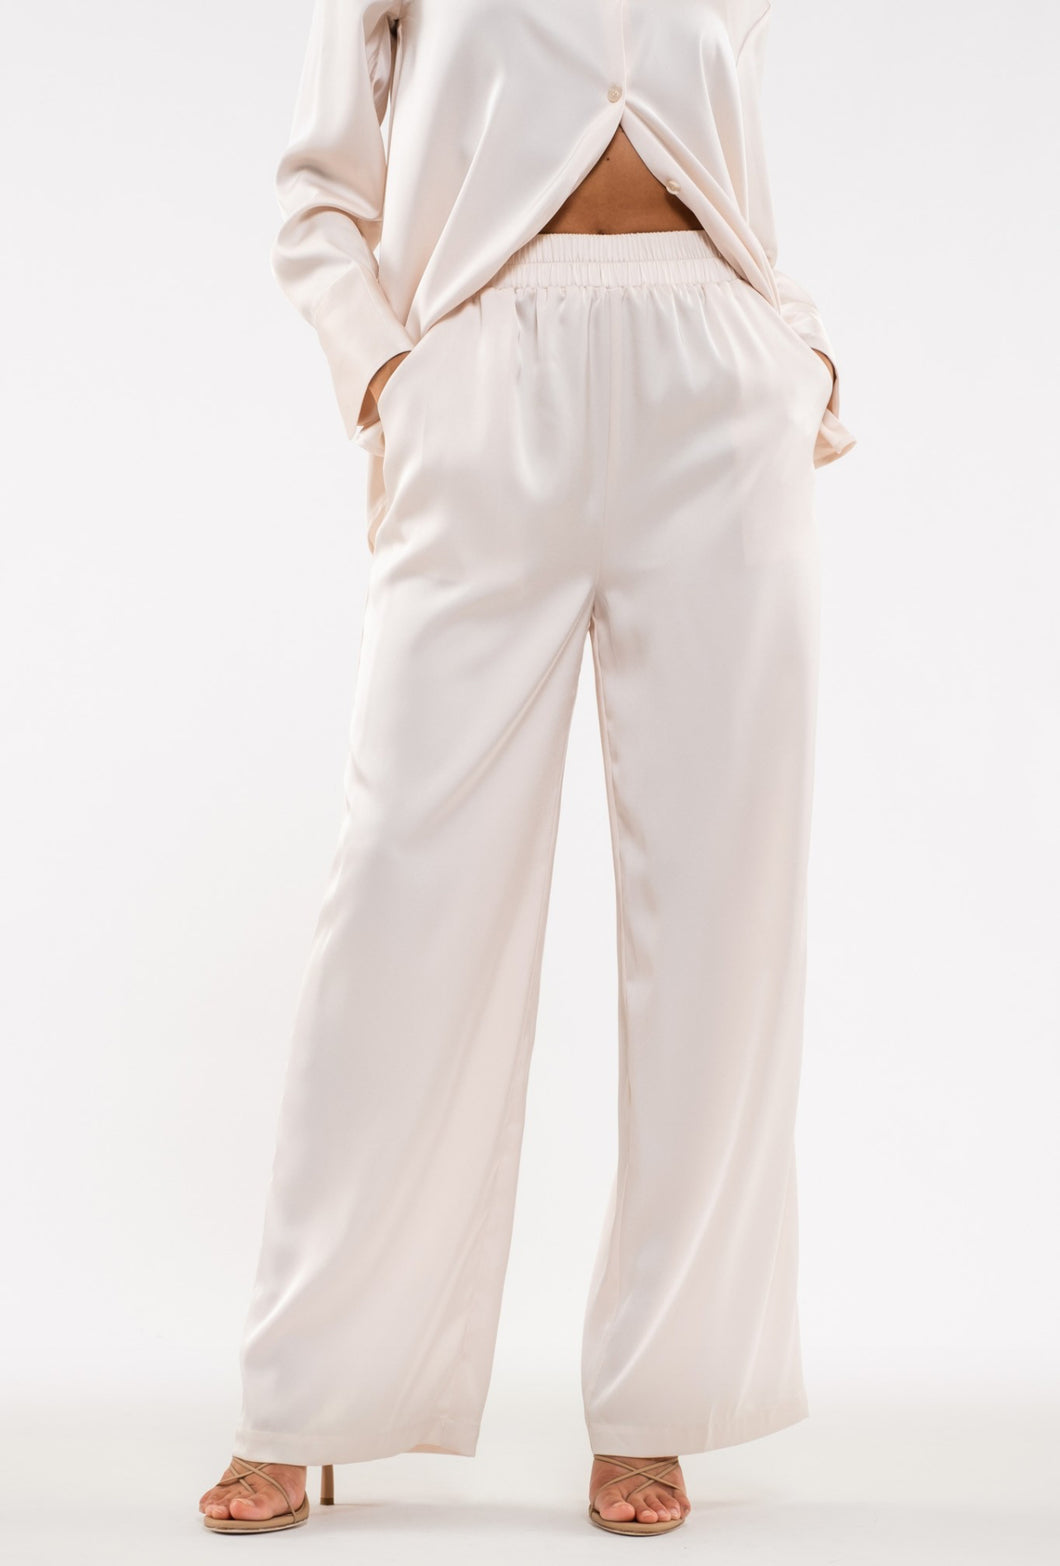 Boss Lady Satin Pants in Champagne